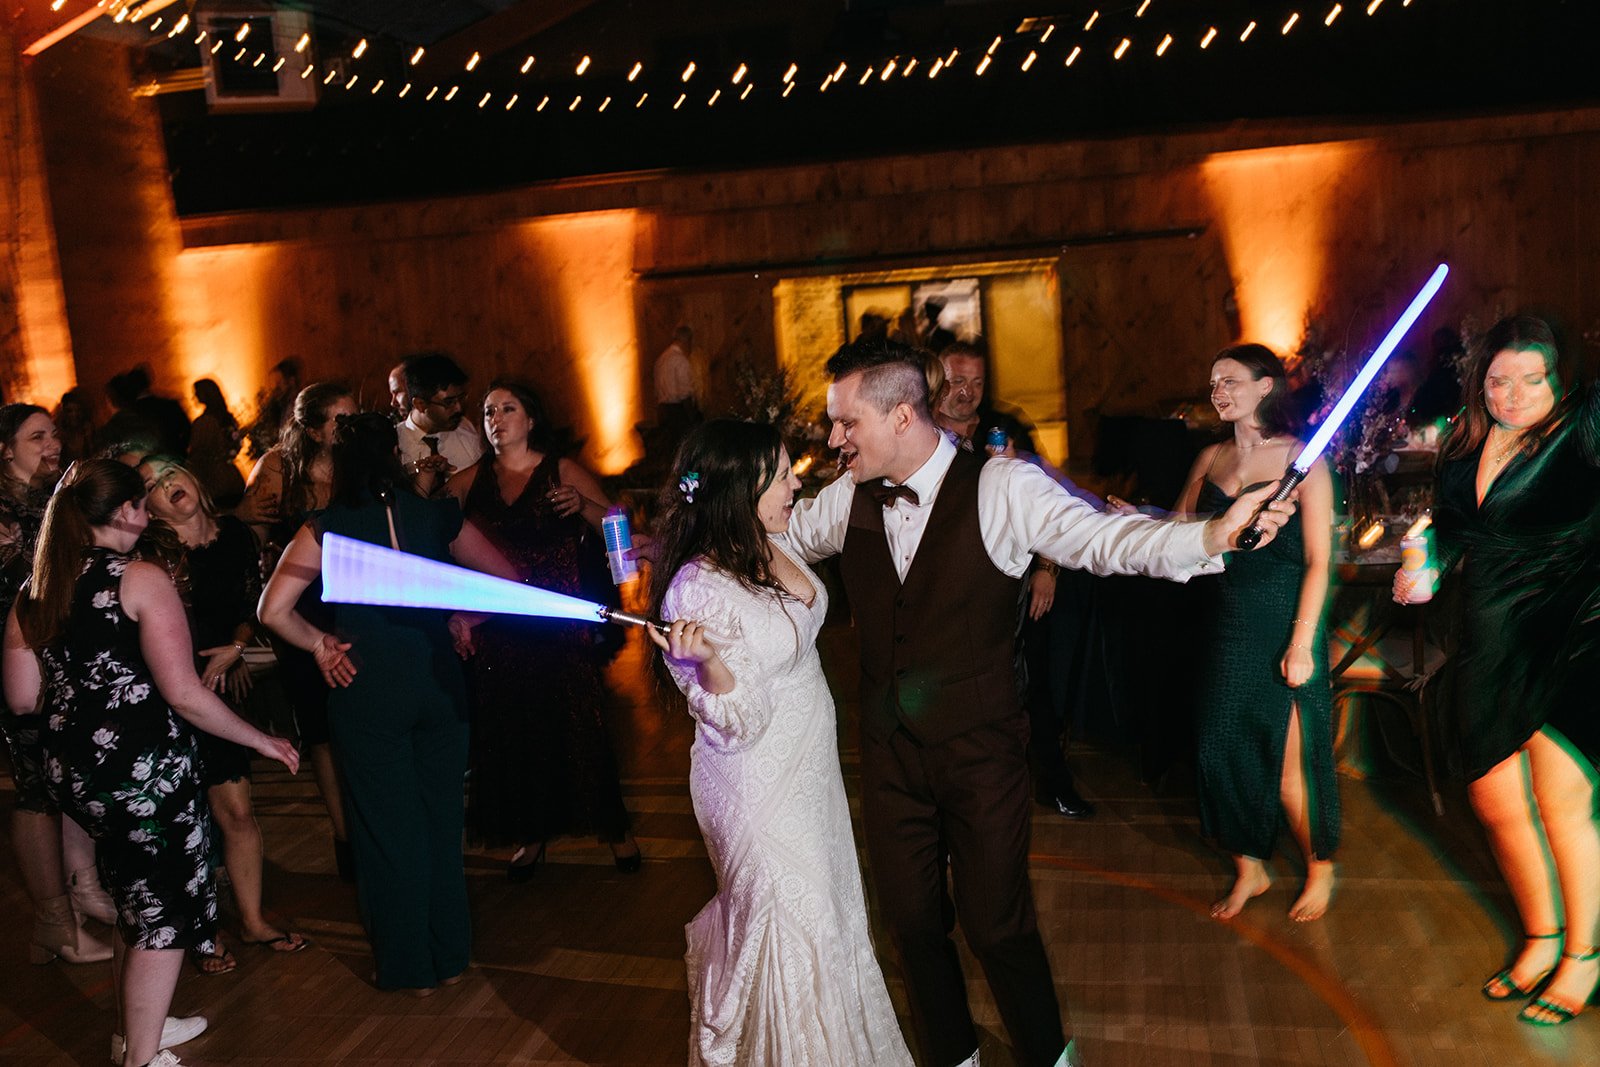 A bride and groom with lightsabers at their wedding reception.